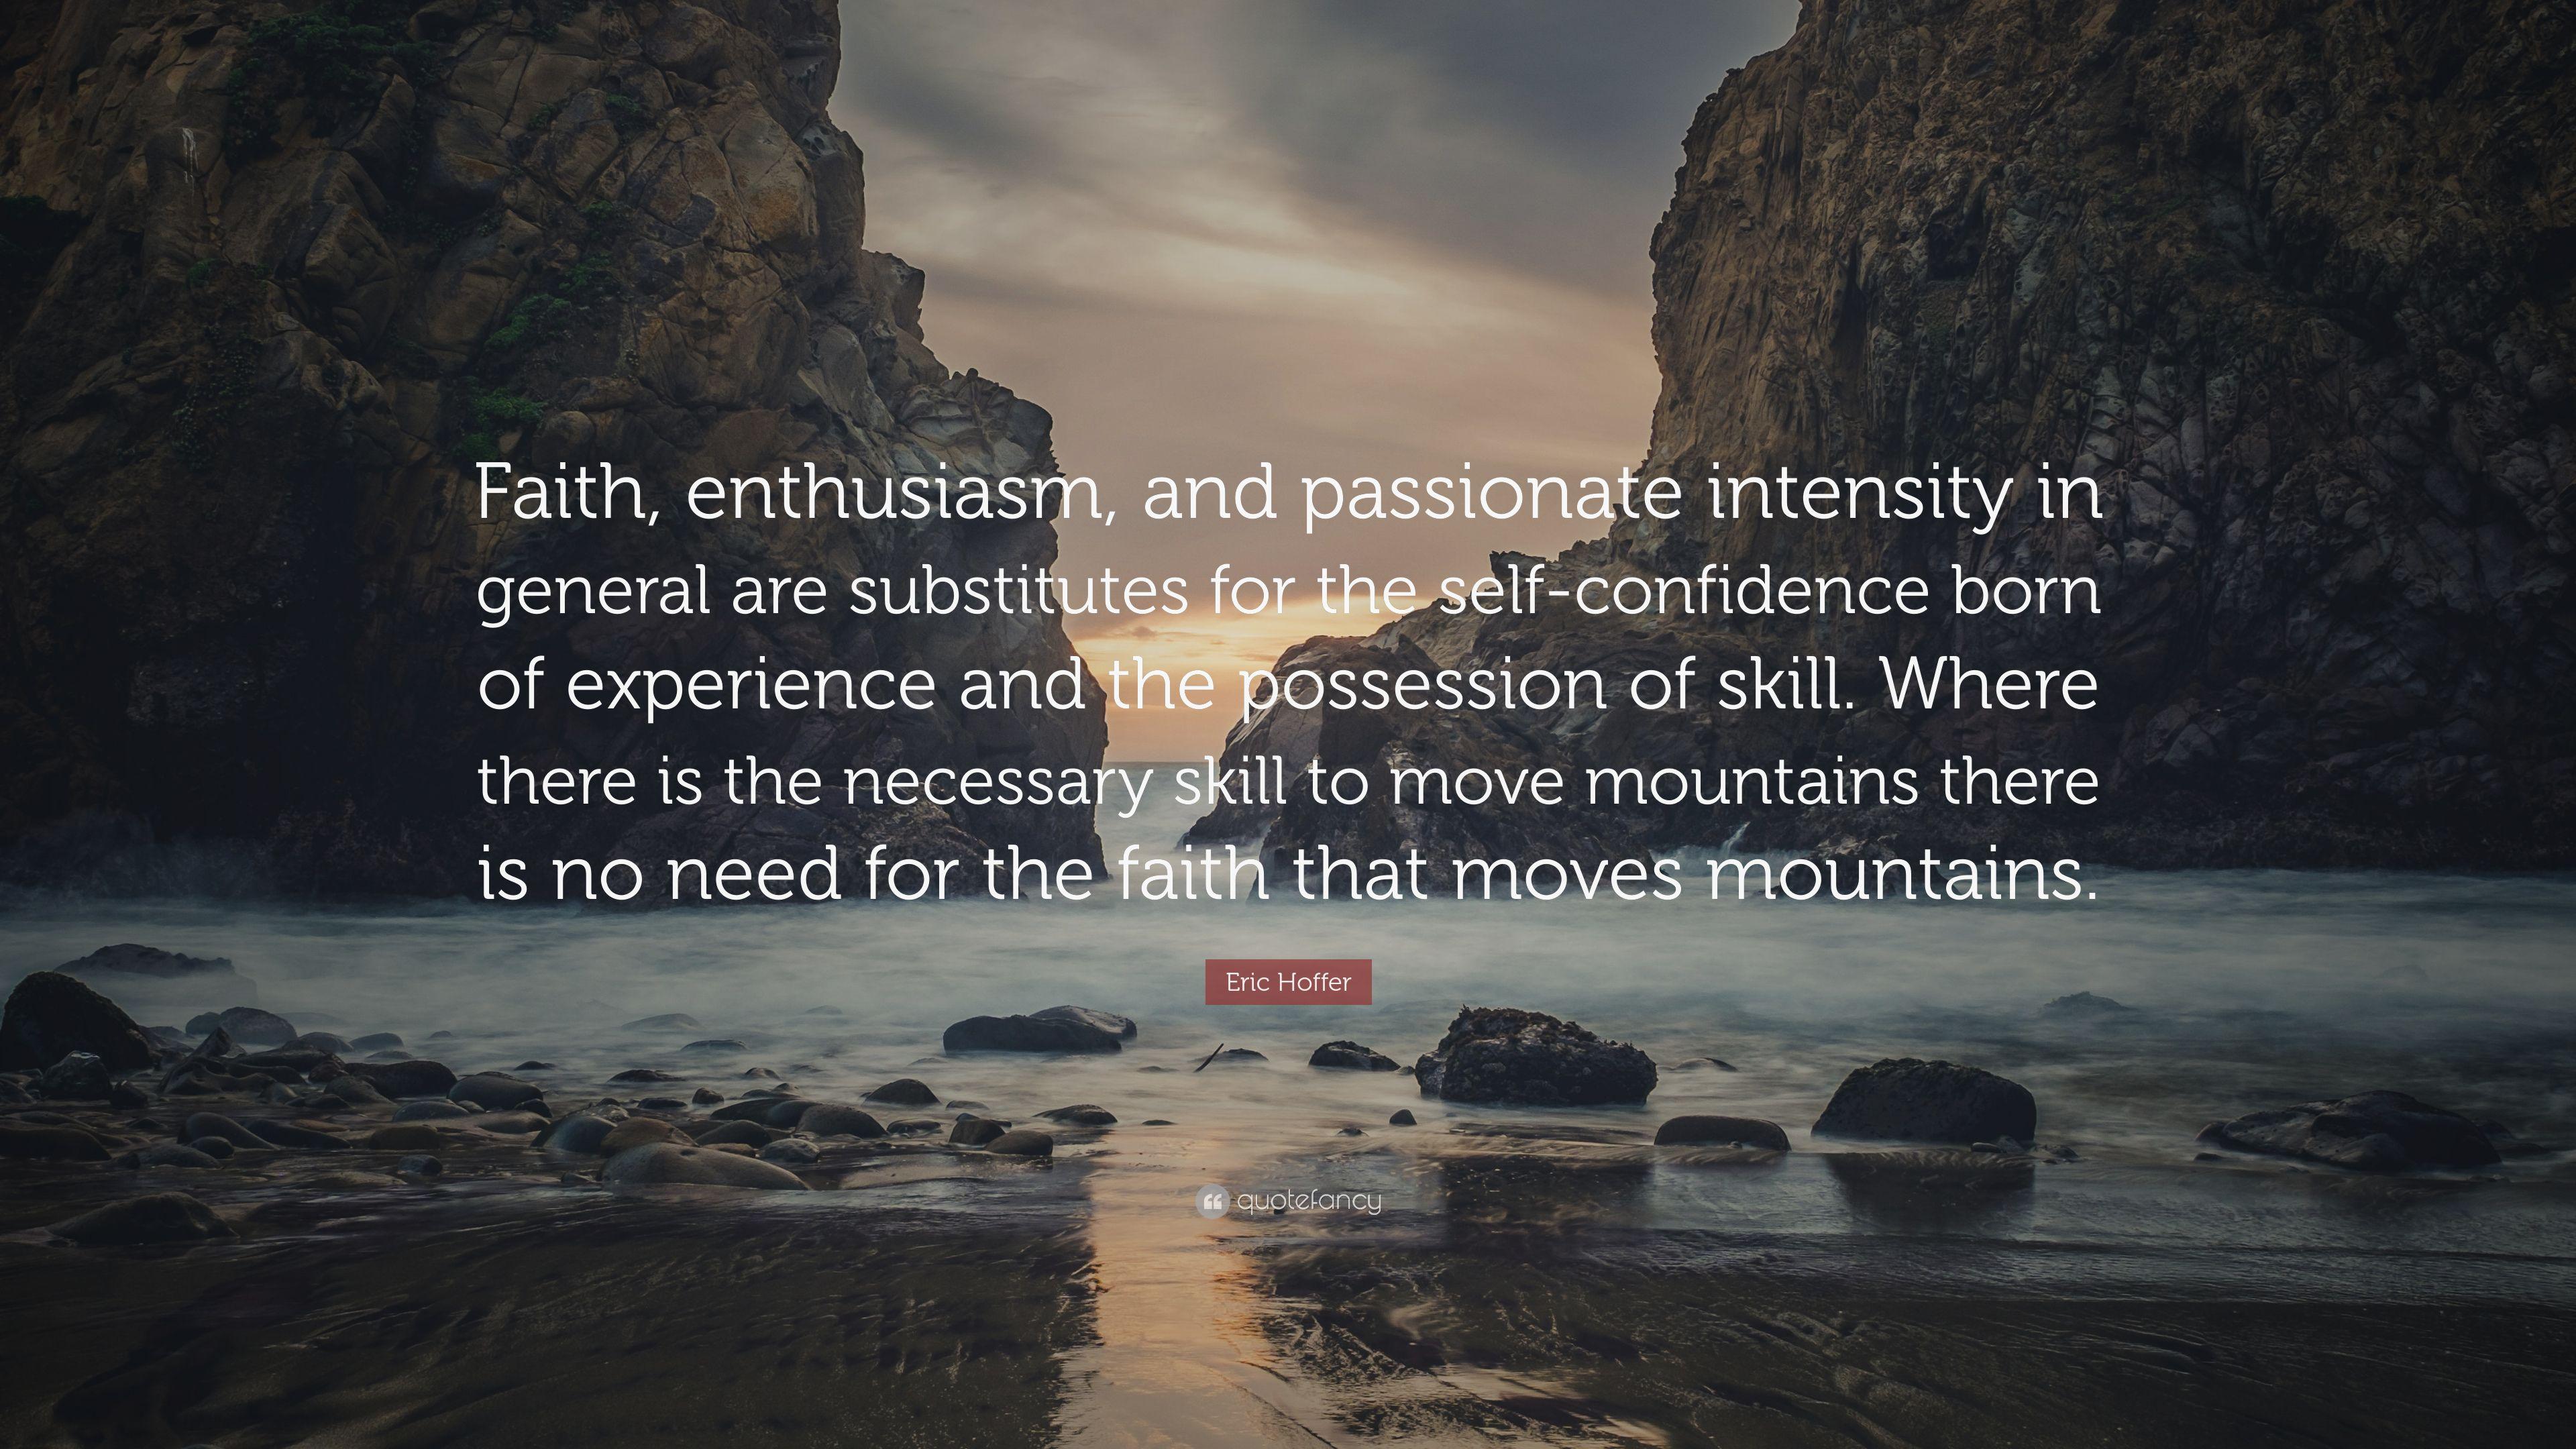 Eric Hoffer Quote: “Faith, enthusiasm, and passionate intensity